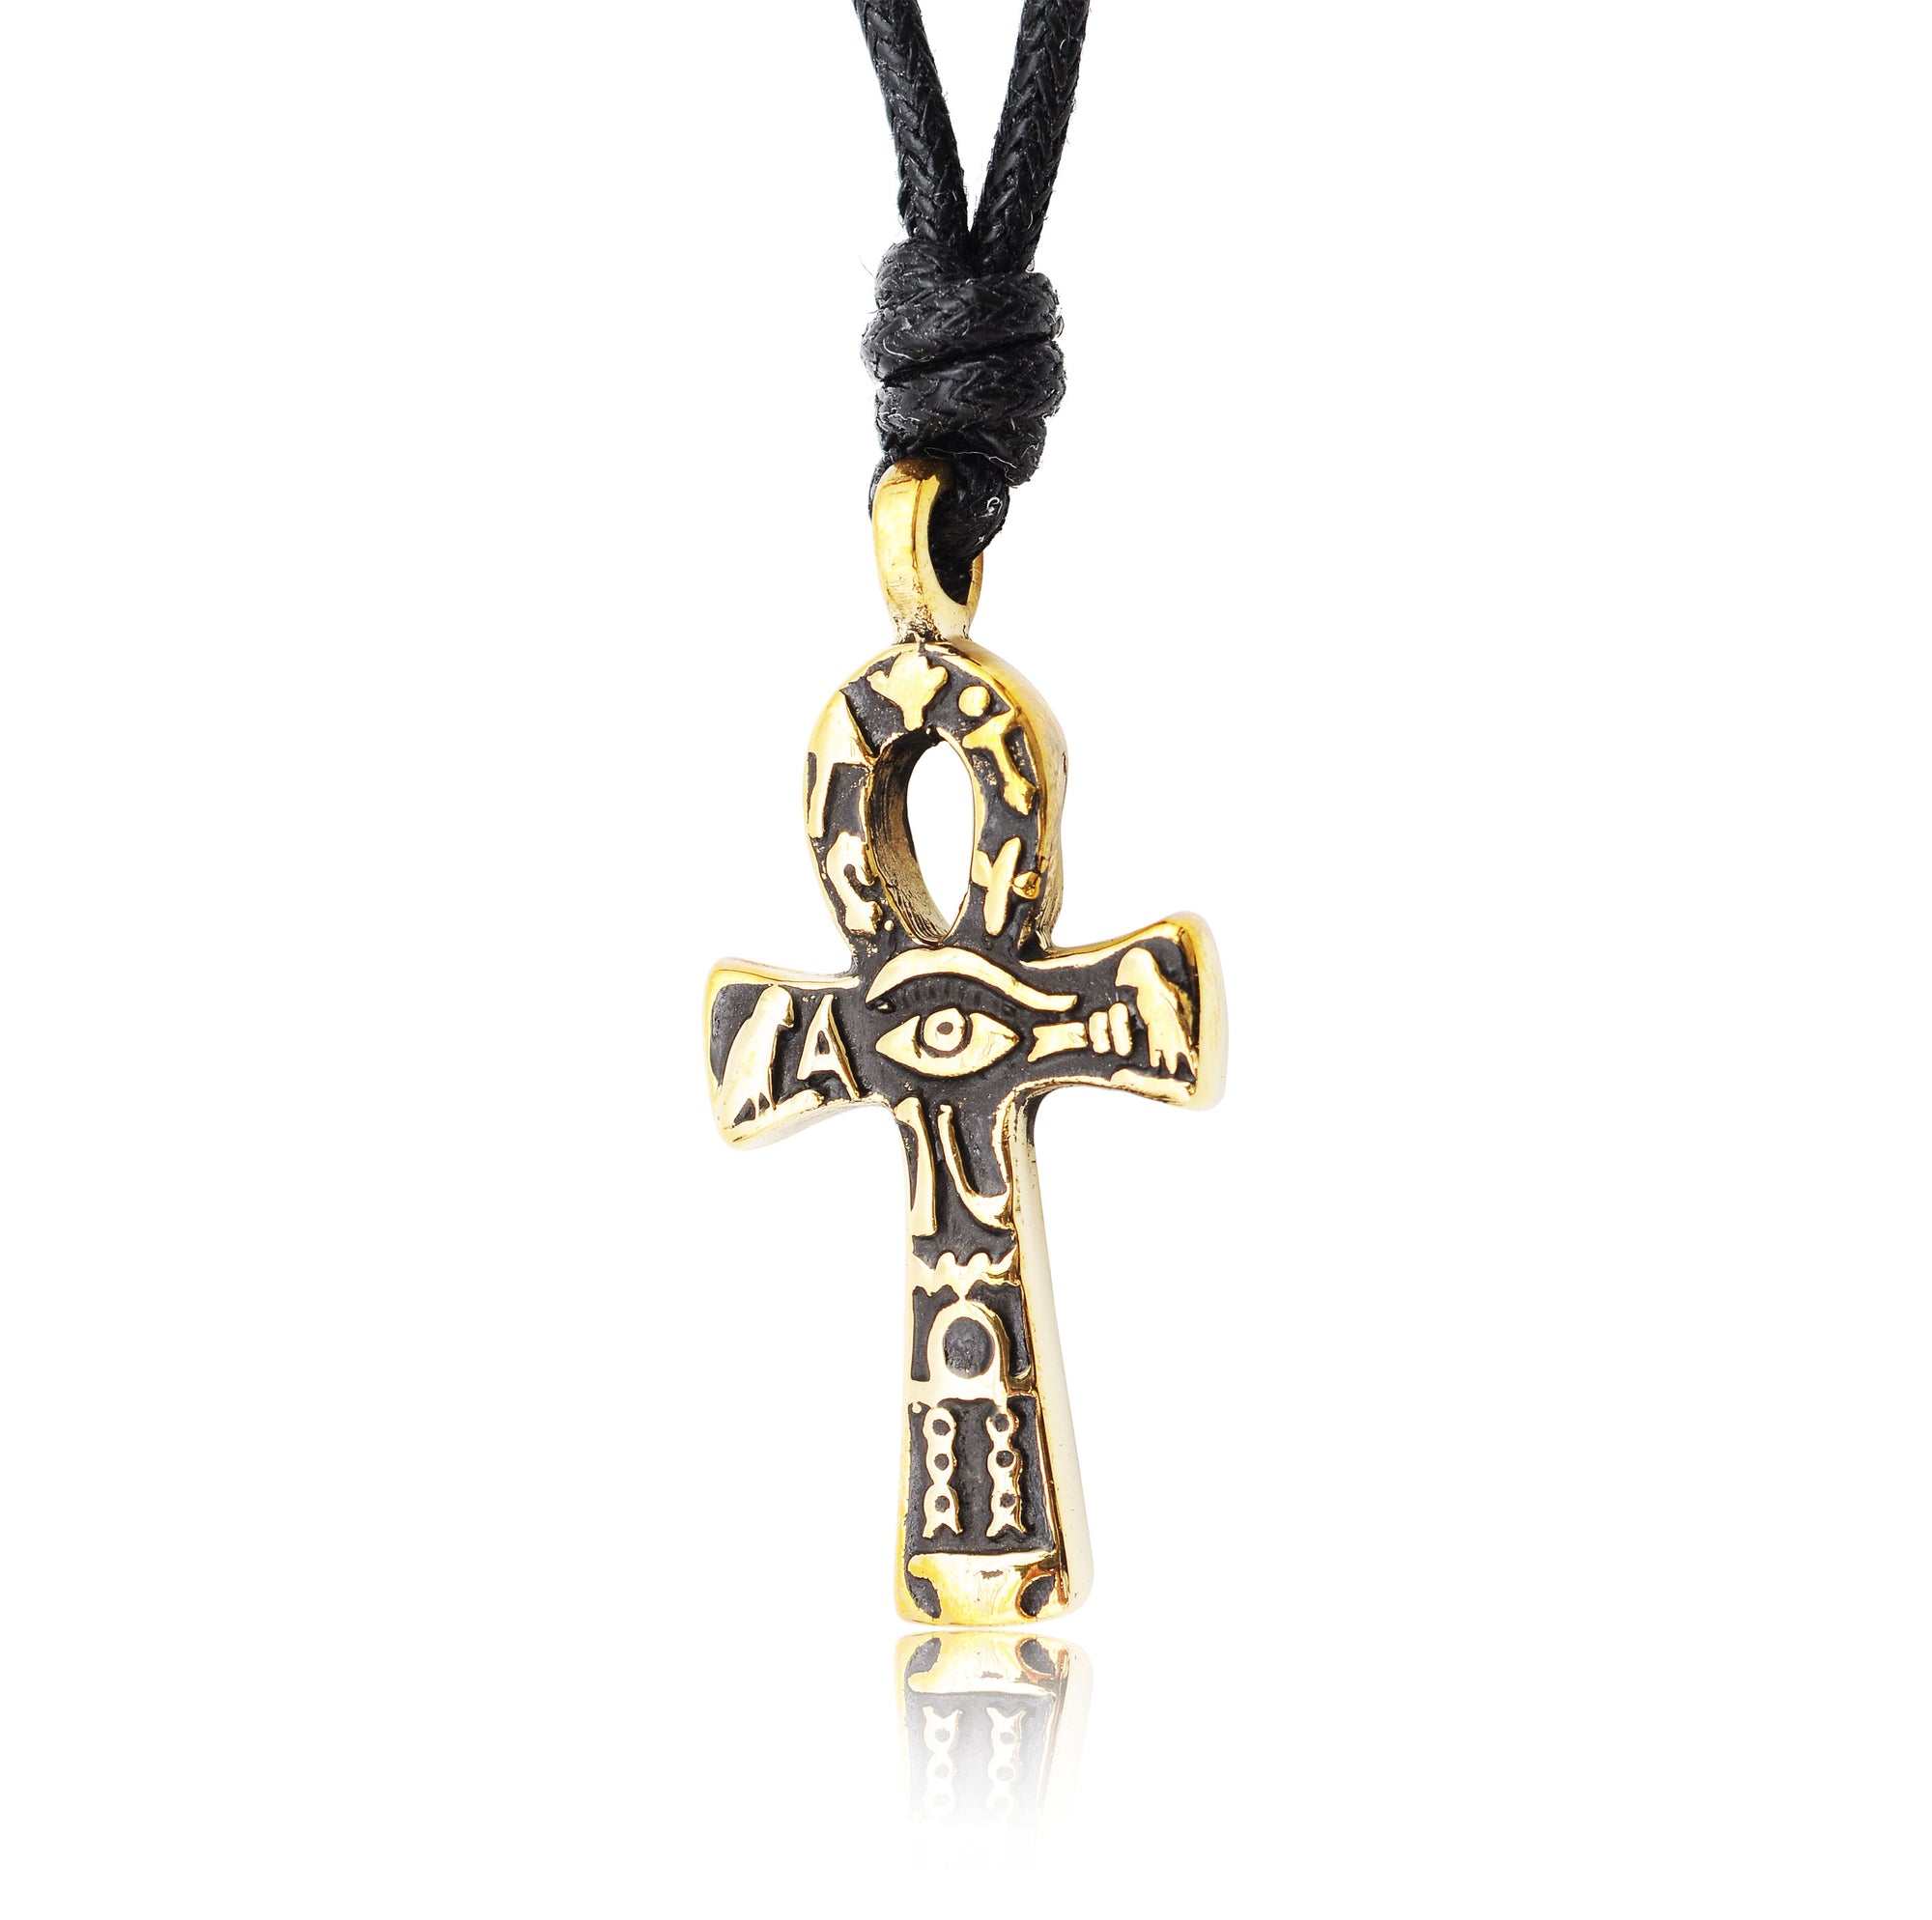 Kemite Ankh Key Eye of Ra Gold Brass/Sterling SIlver Necklace Pendant Jewelry With Cotton Cord